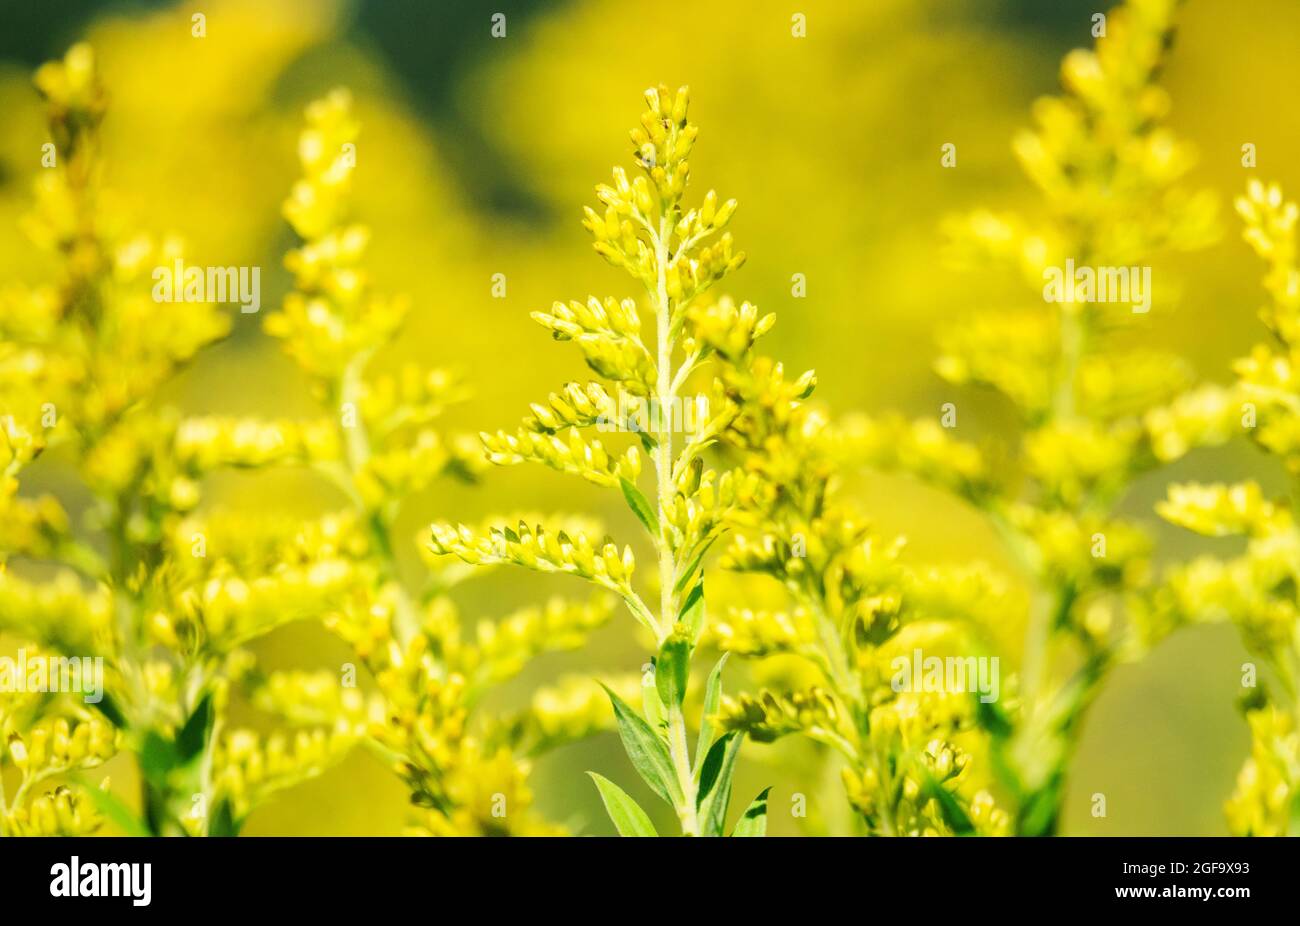 A field of golden rod on the verge of blooming. Stock Photo